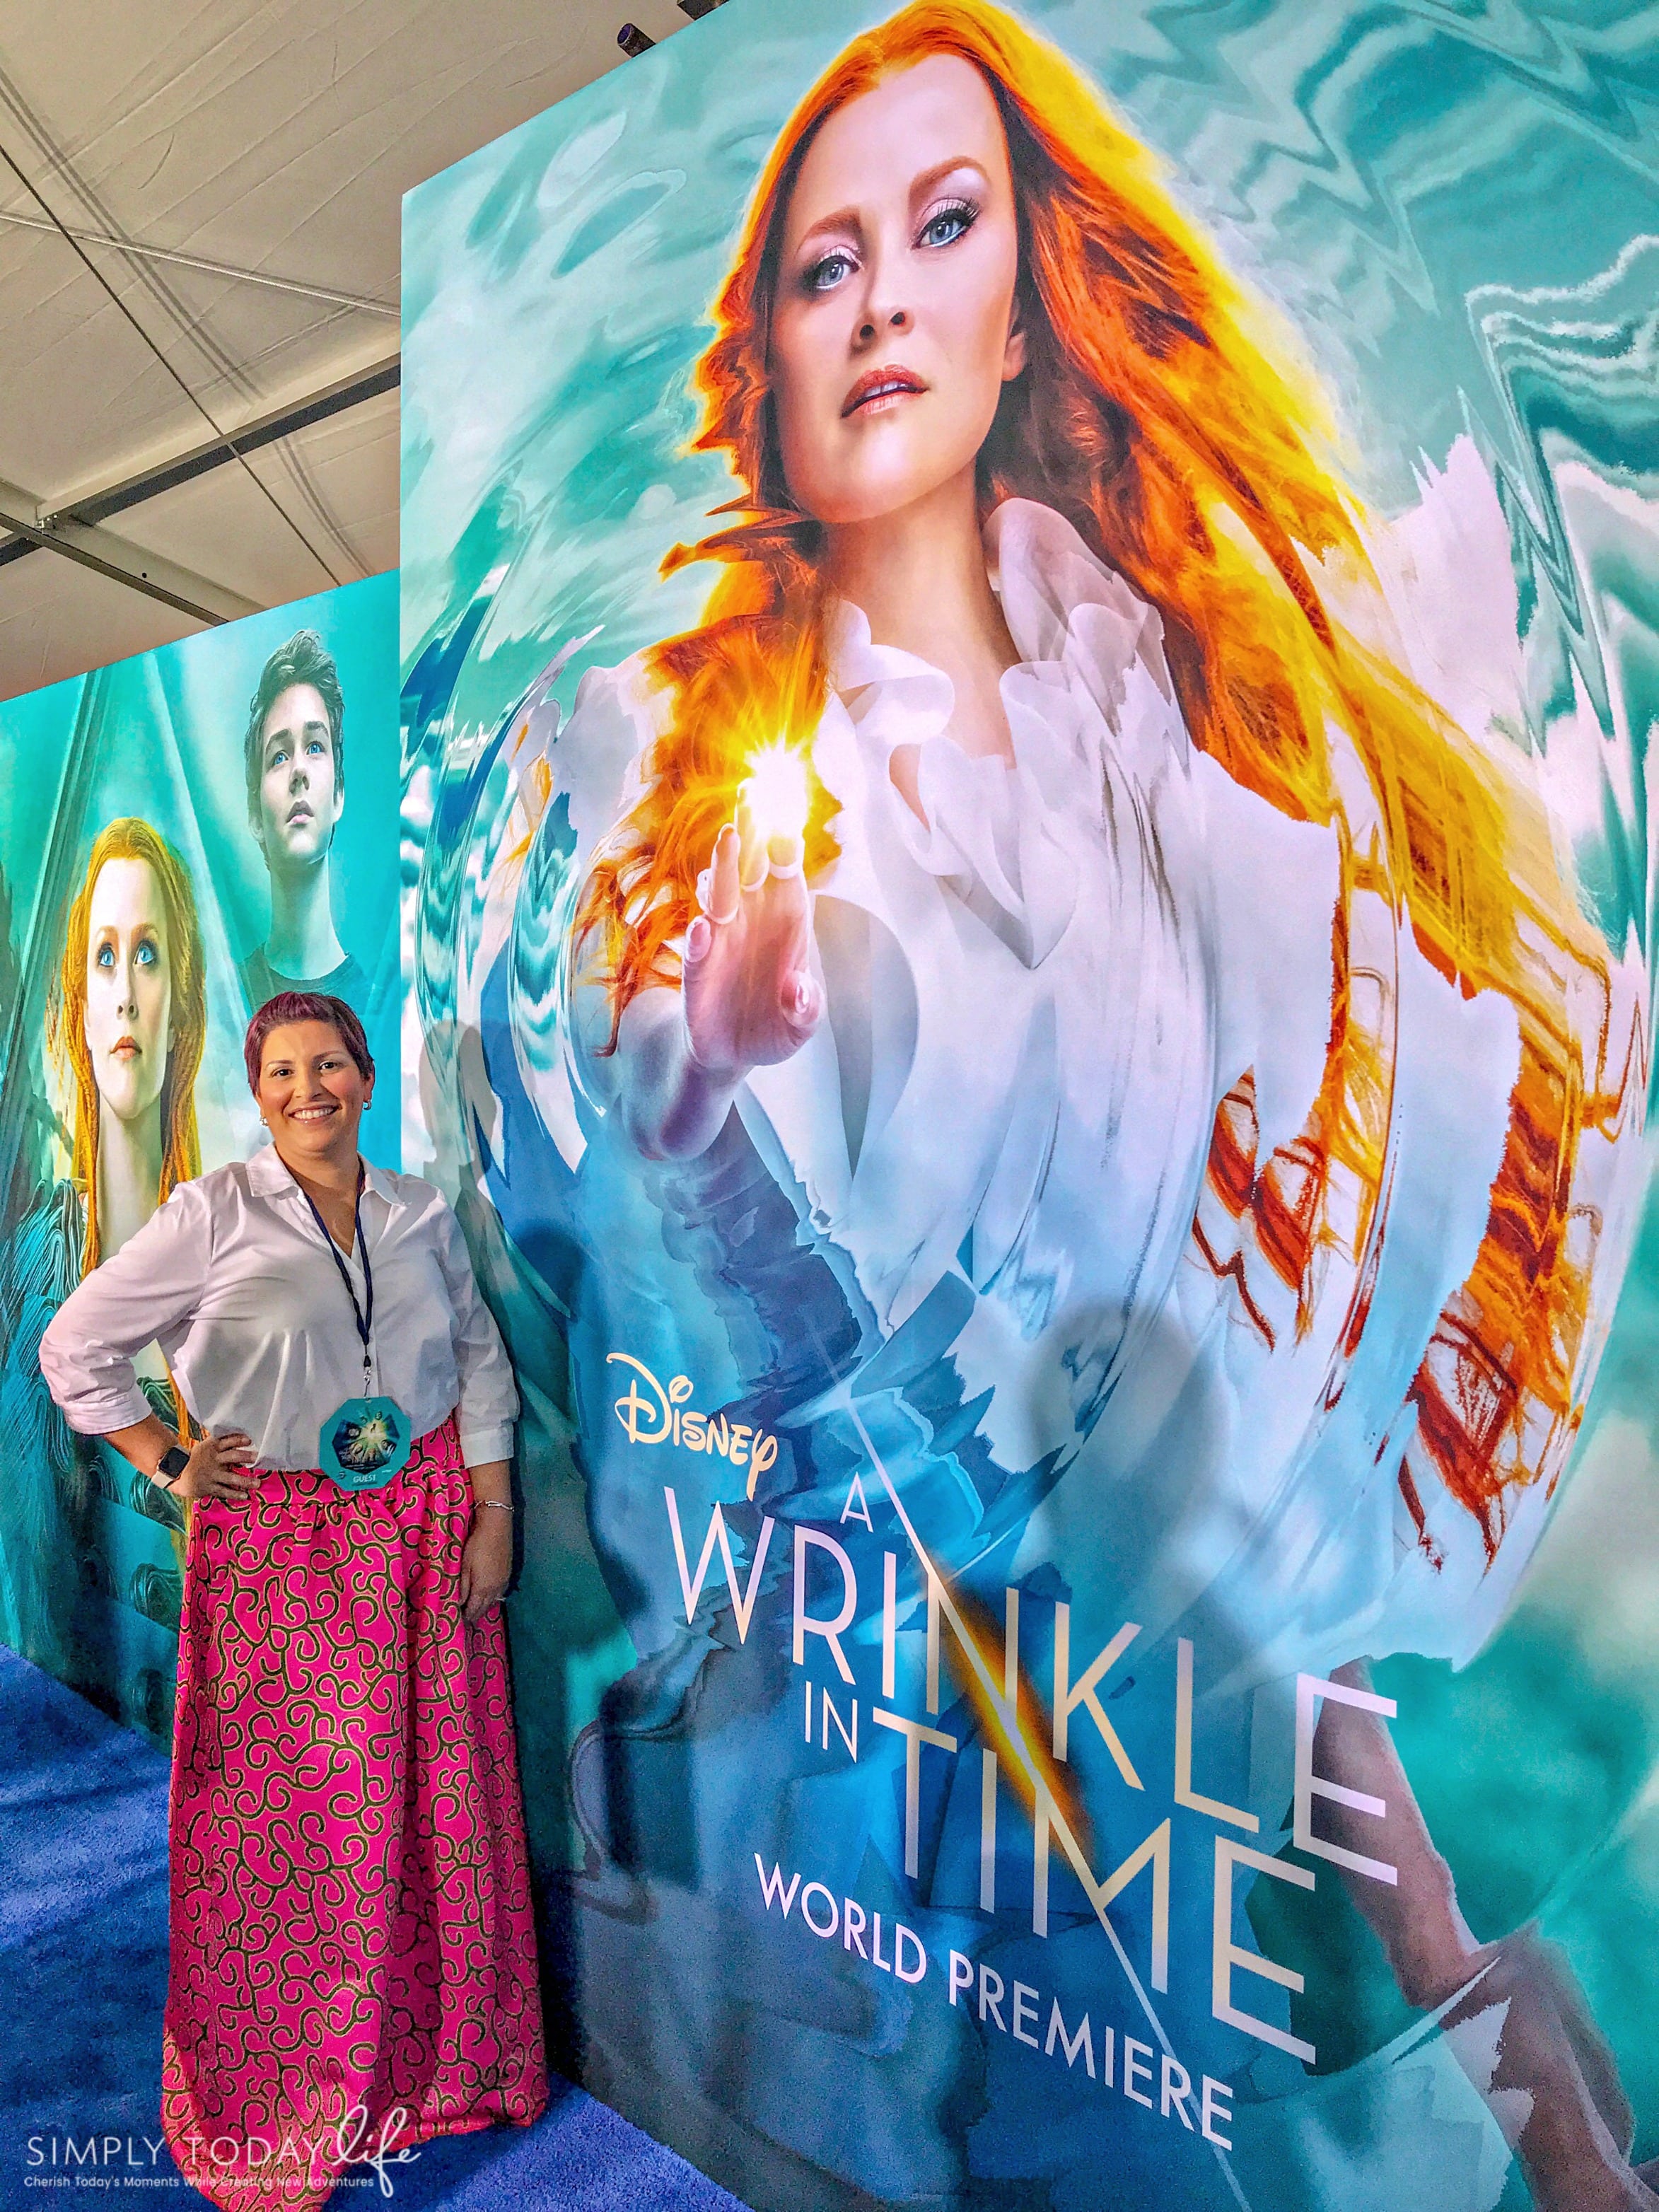 A Wrinkle In Time Red Carpet Premiere Photos - simplytodaylife.com